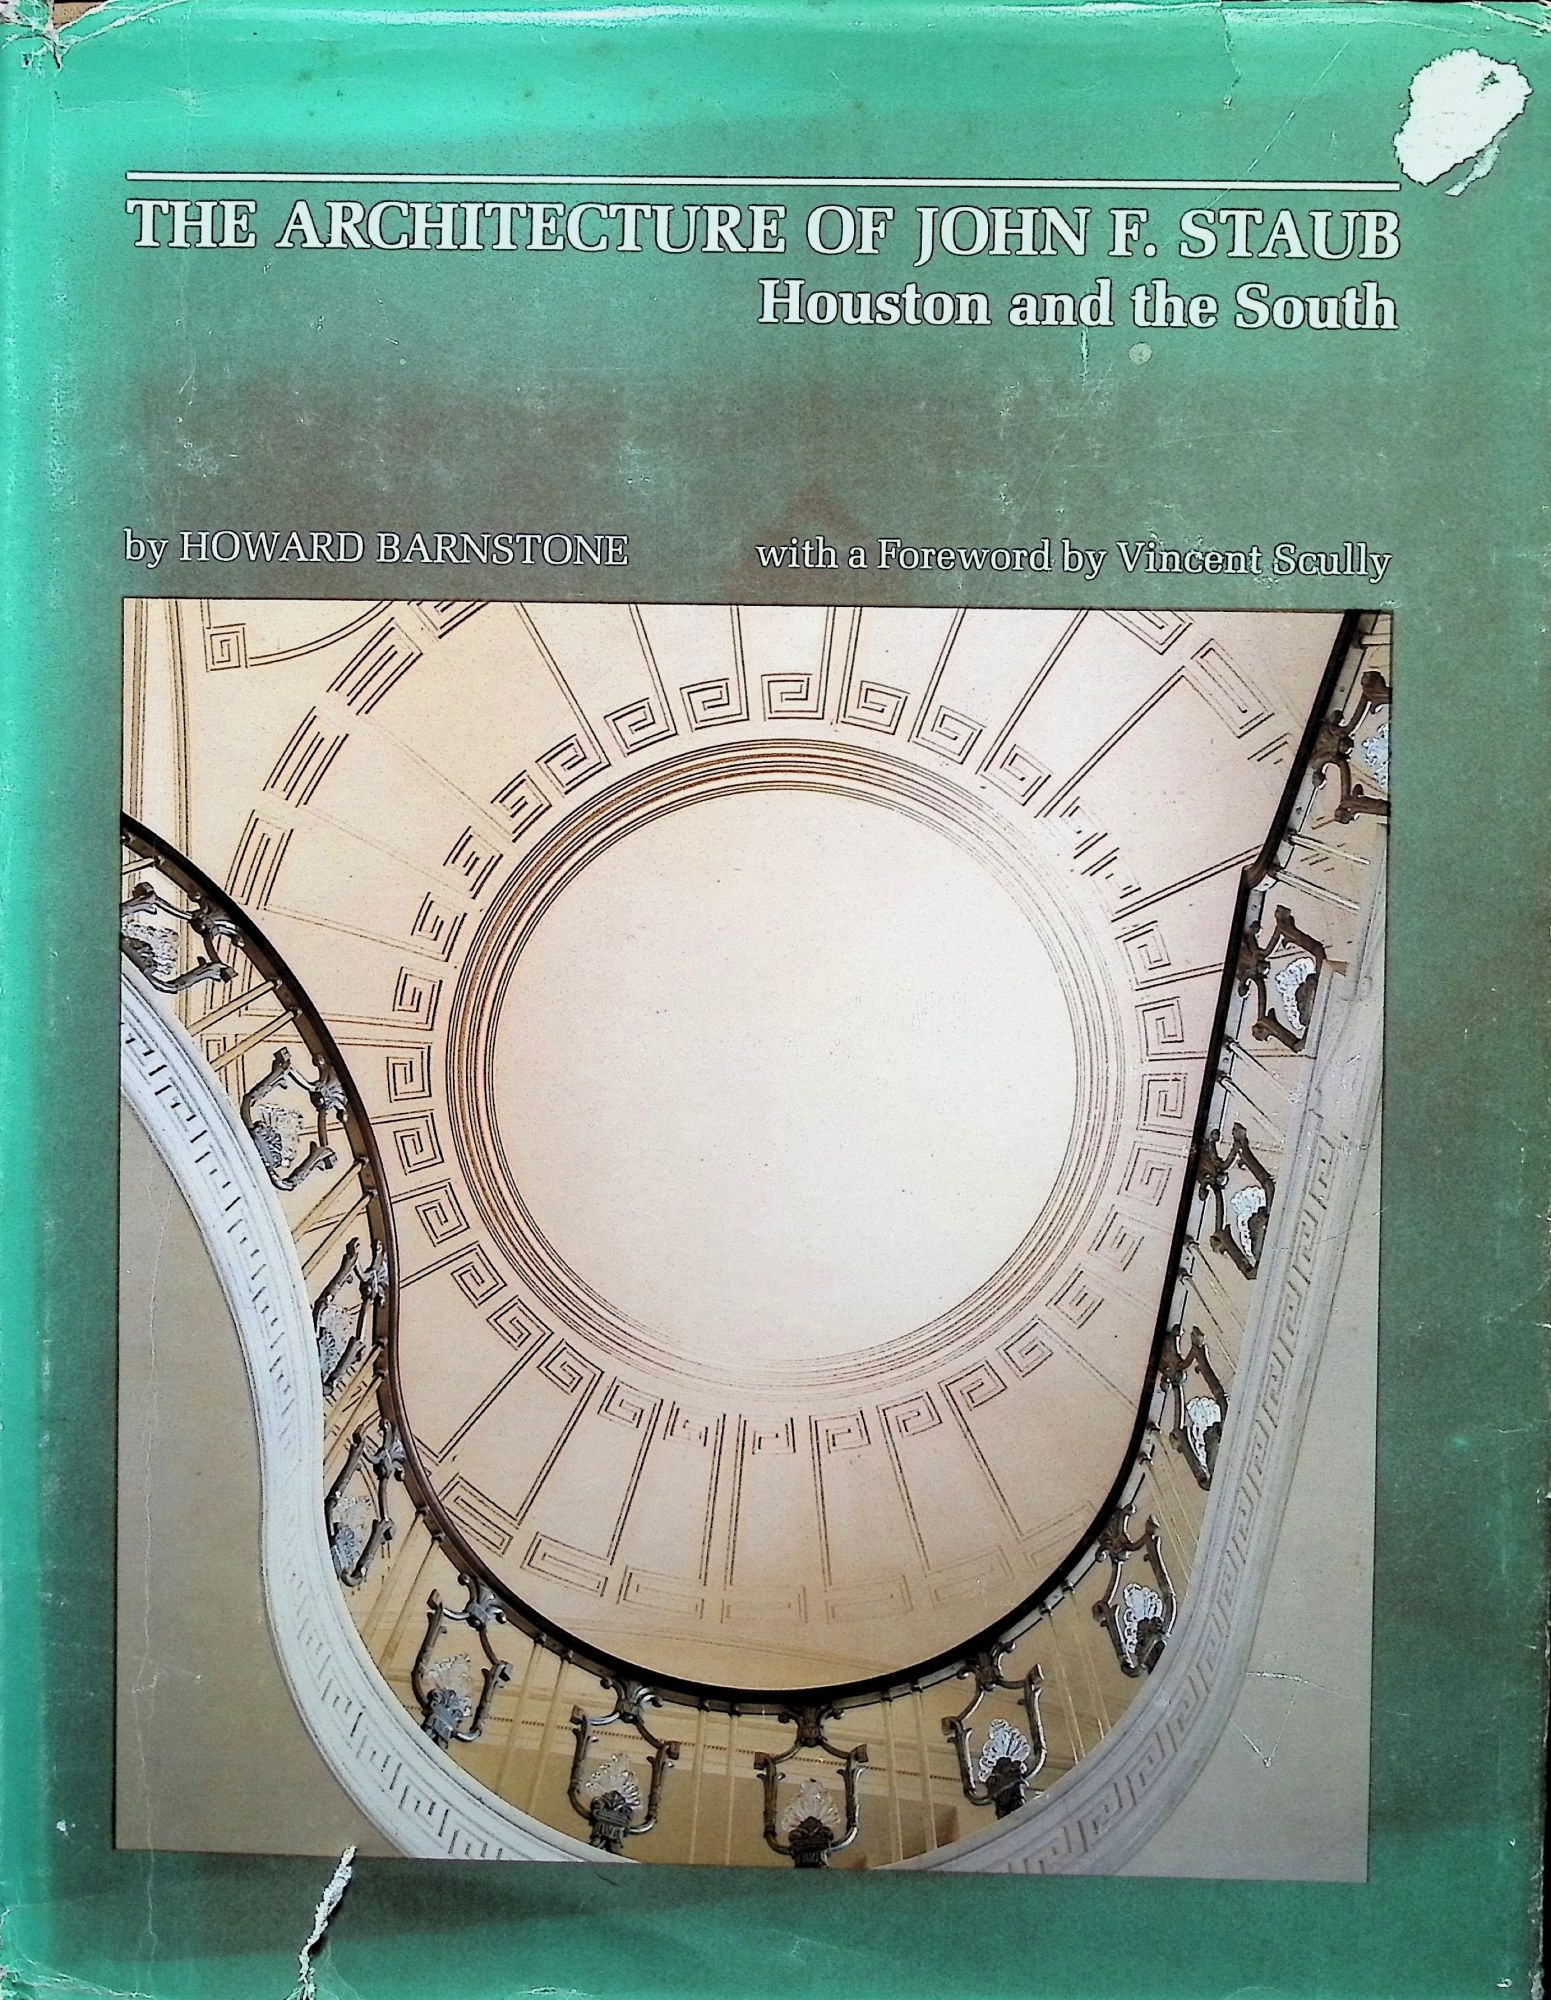 Architecture of John F. Staub: Houston and the South by Howard Barnstone on  Liberty Book Store